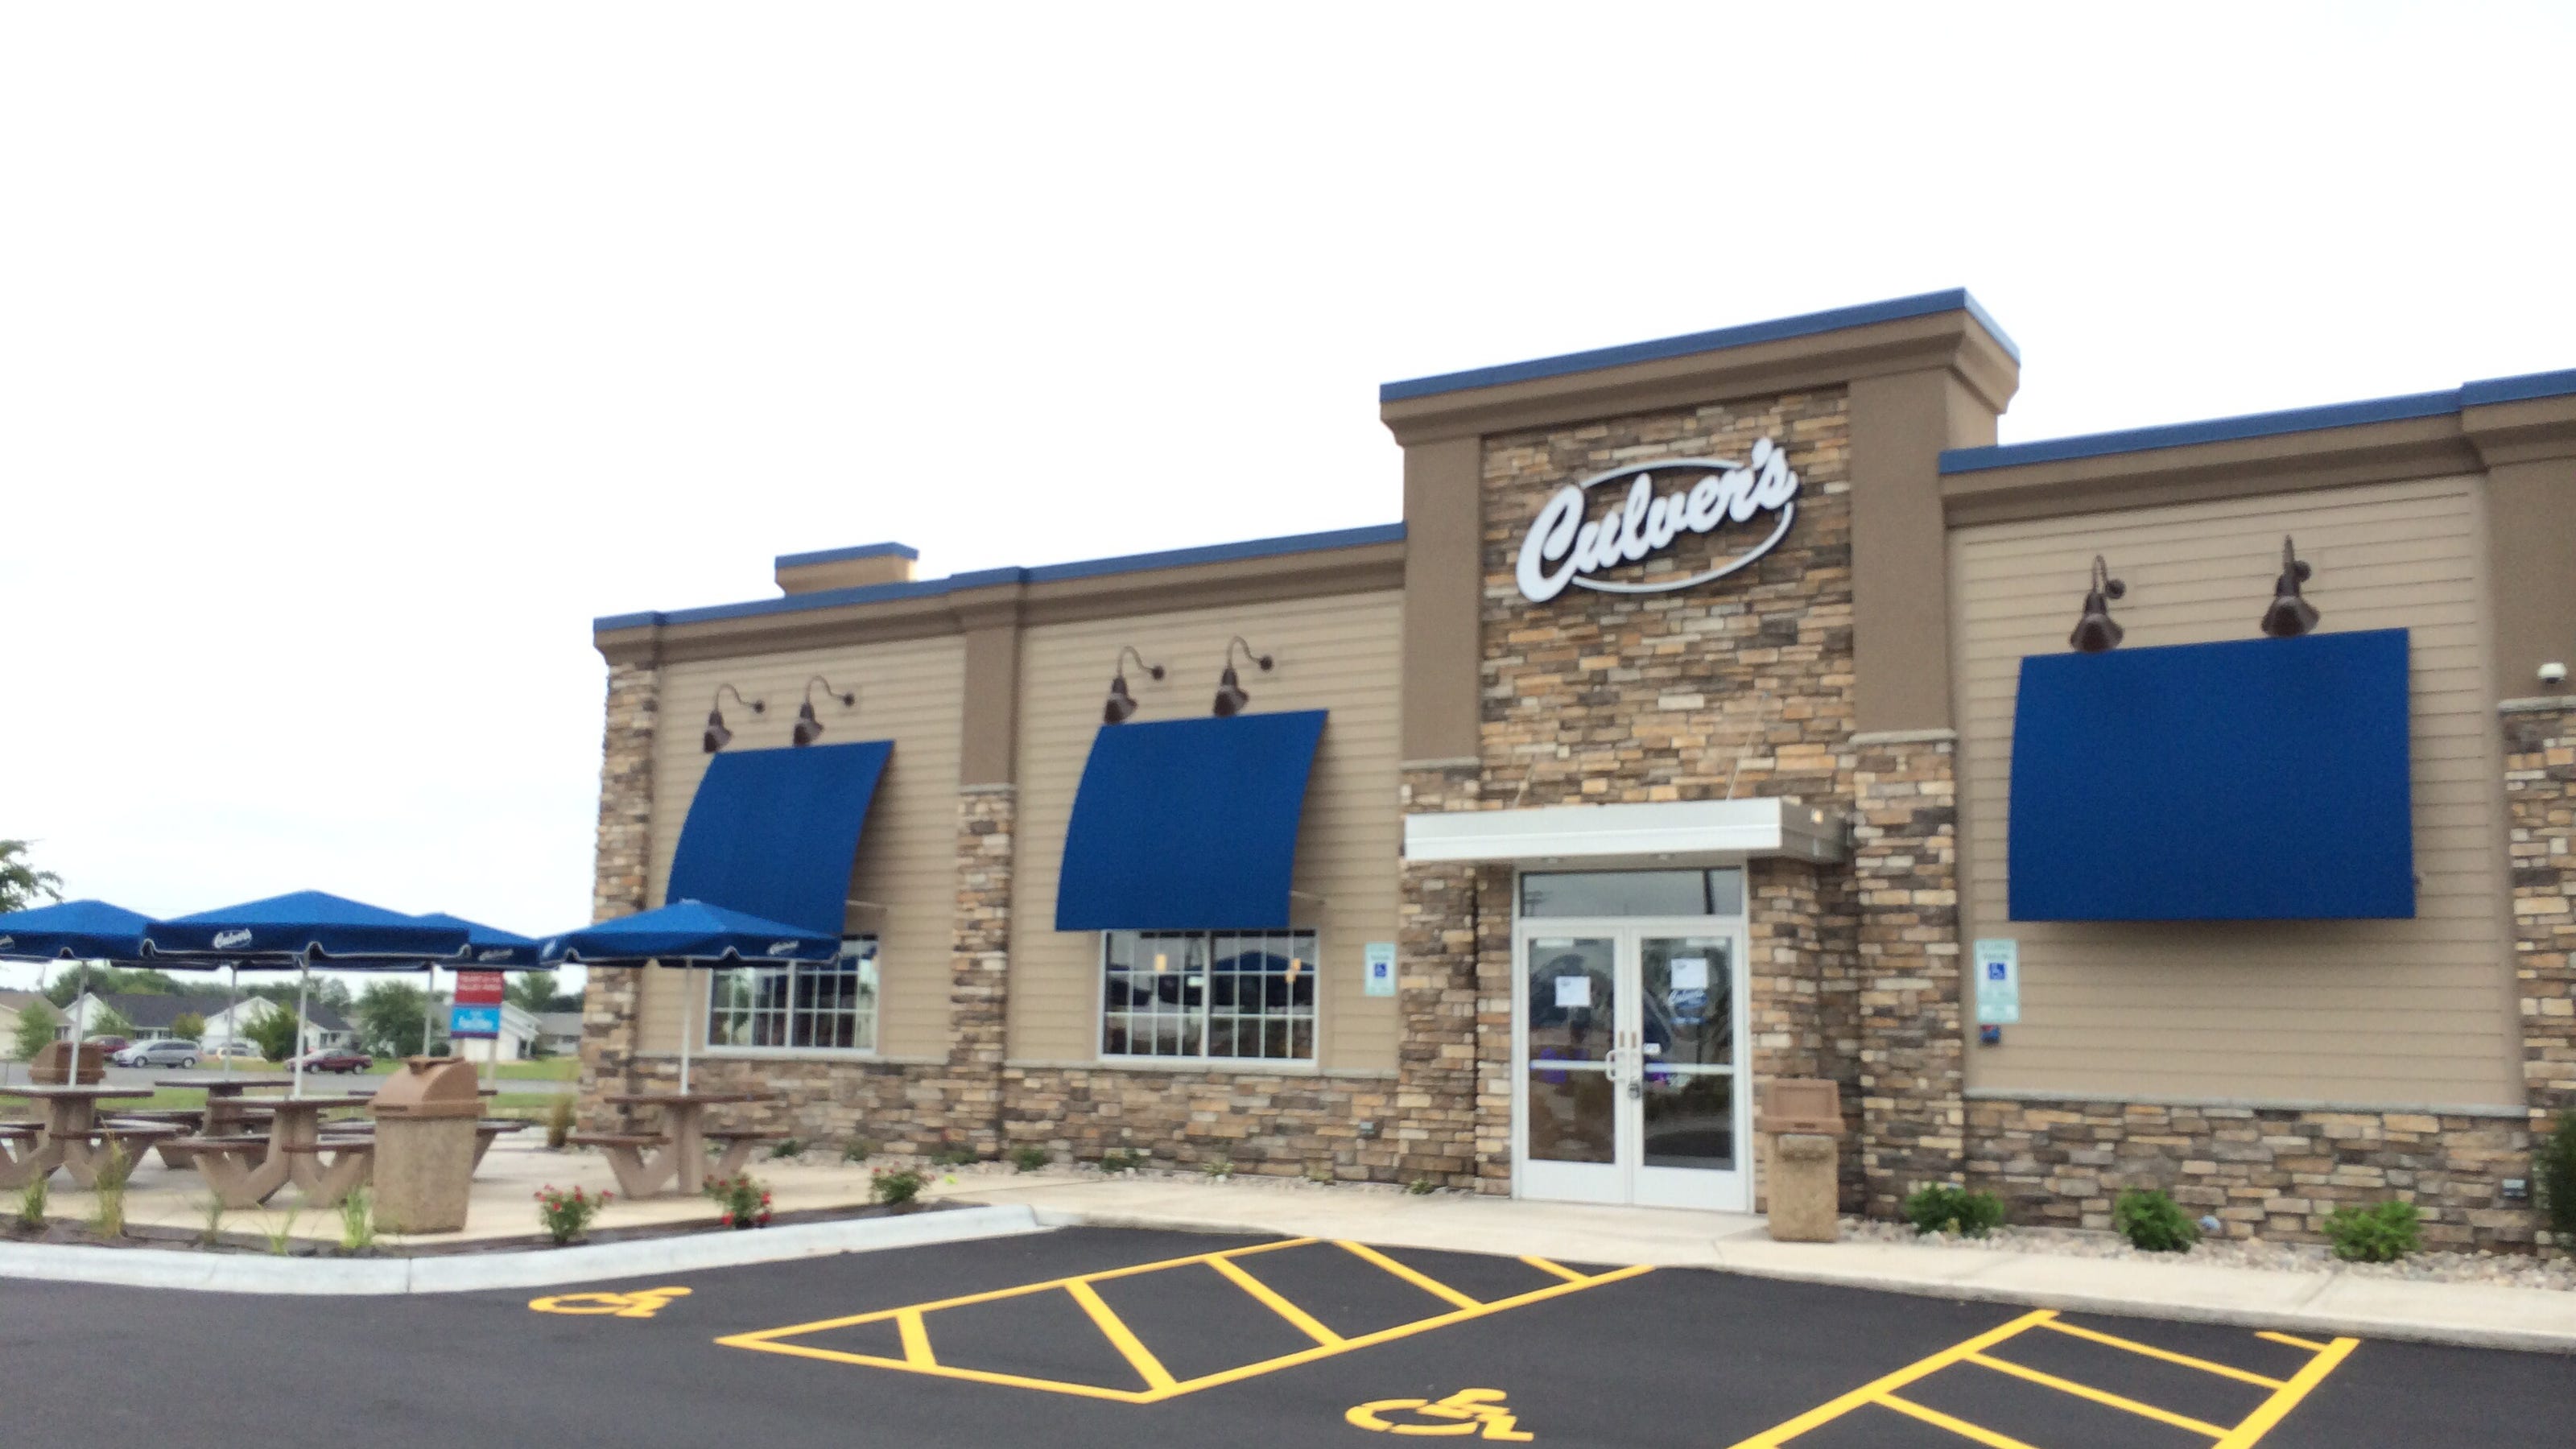 Is The Culver's Dining Room Open